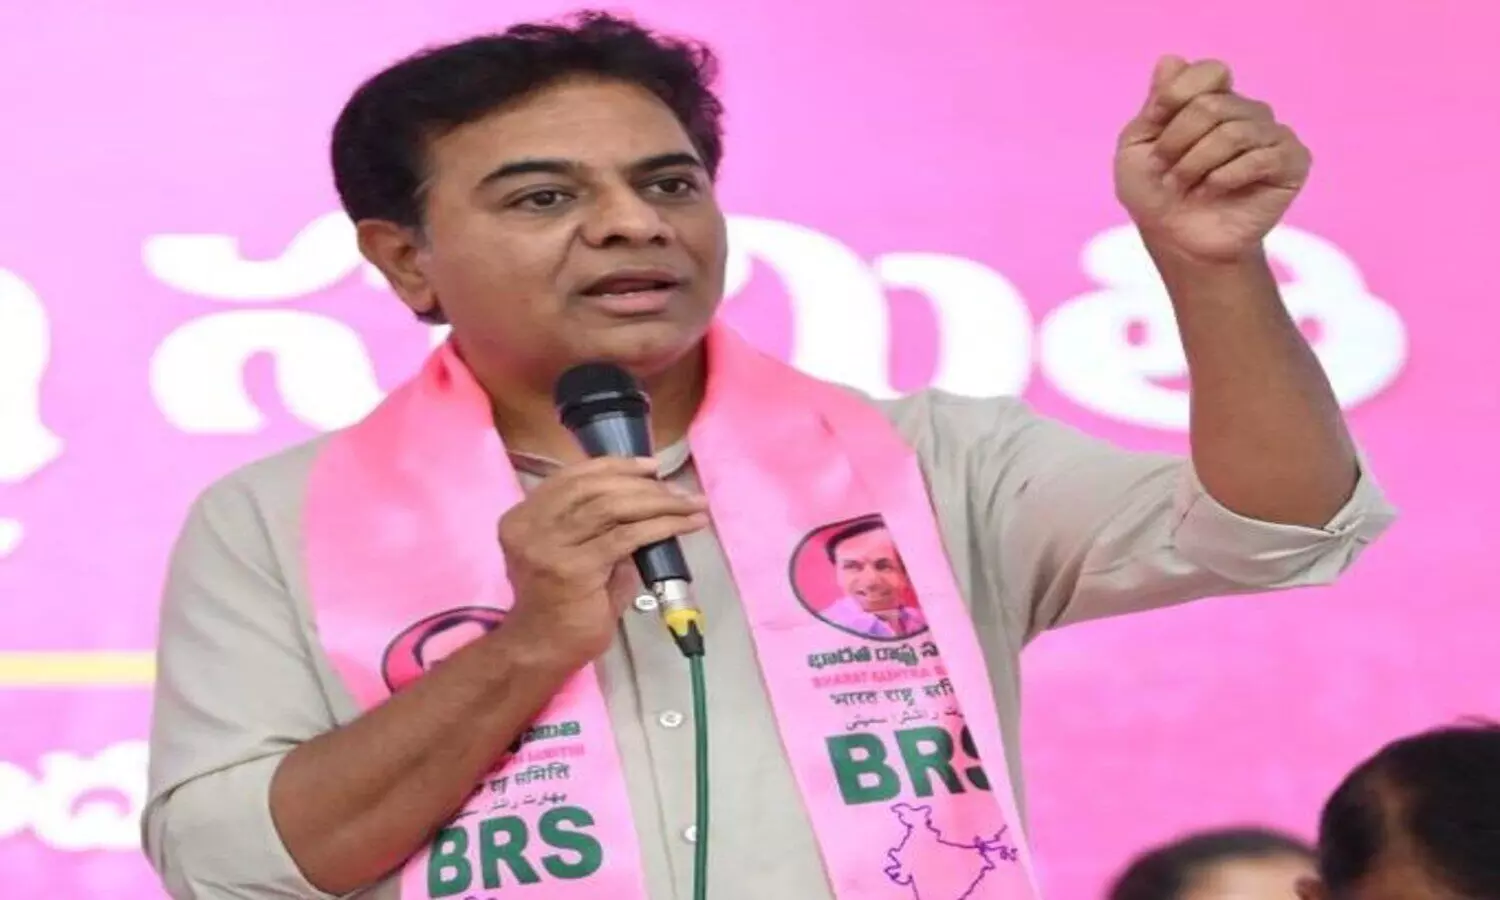 congresscametopowerwith420fakepromises:ktr